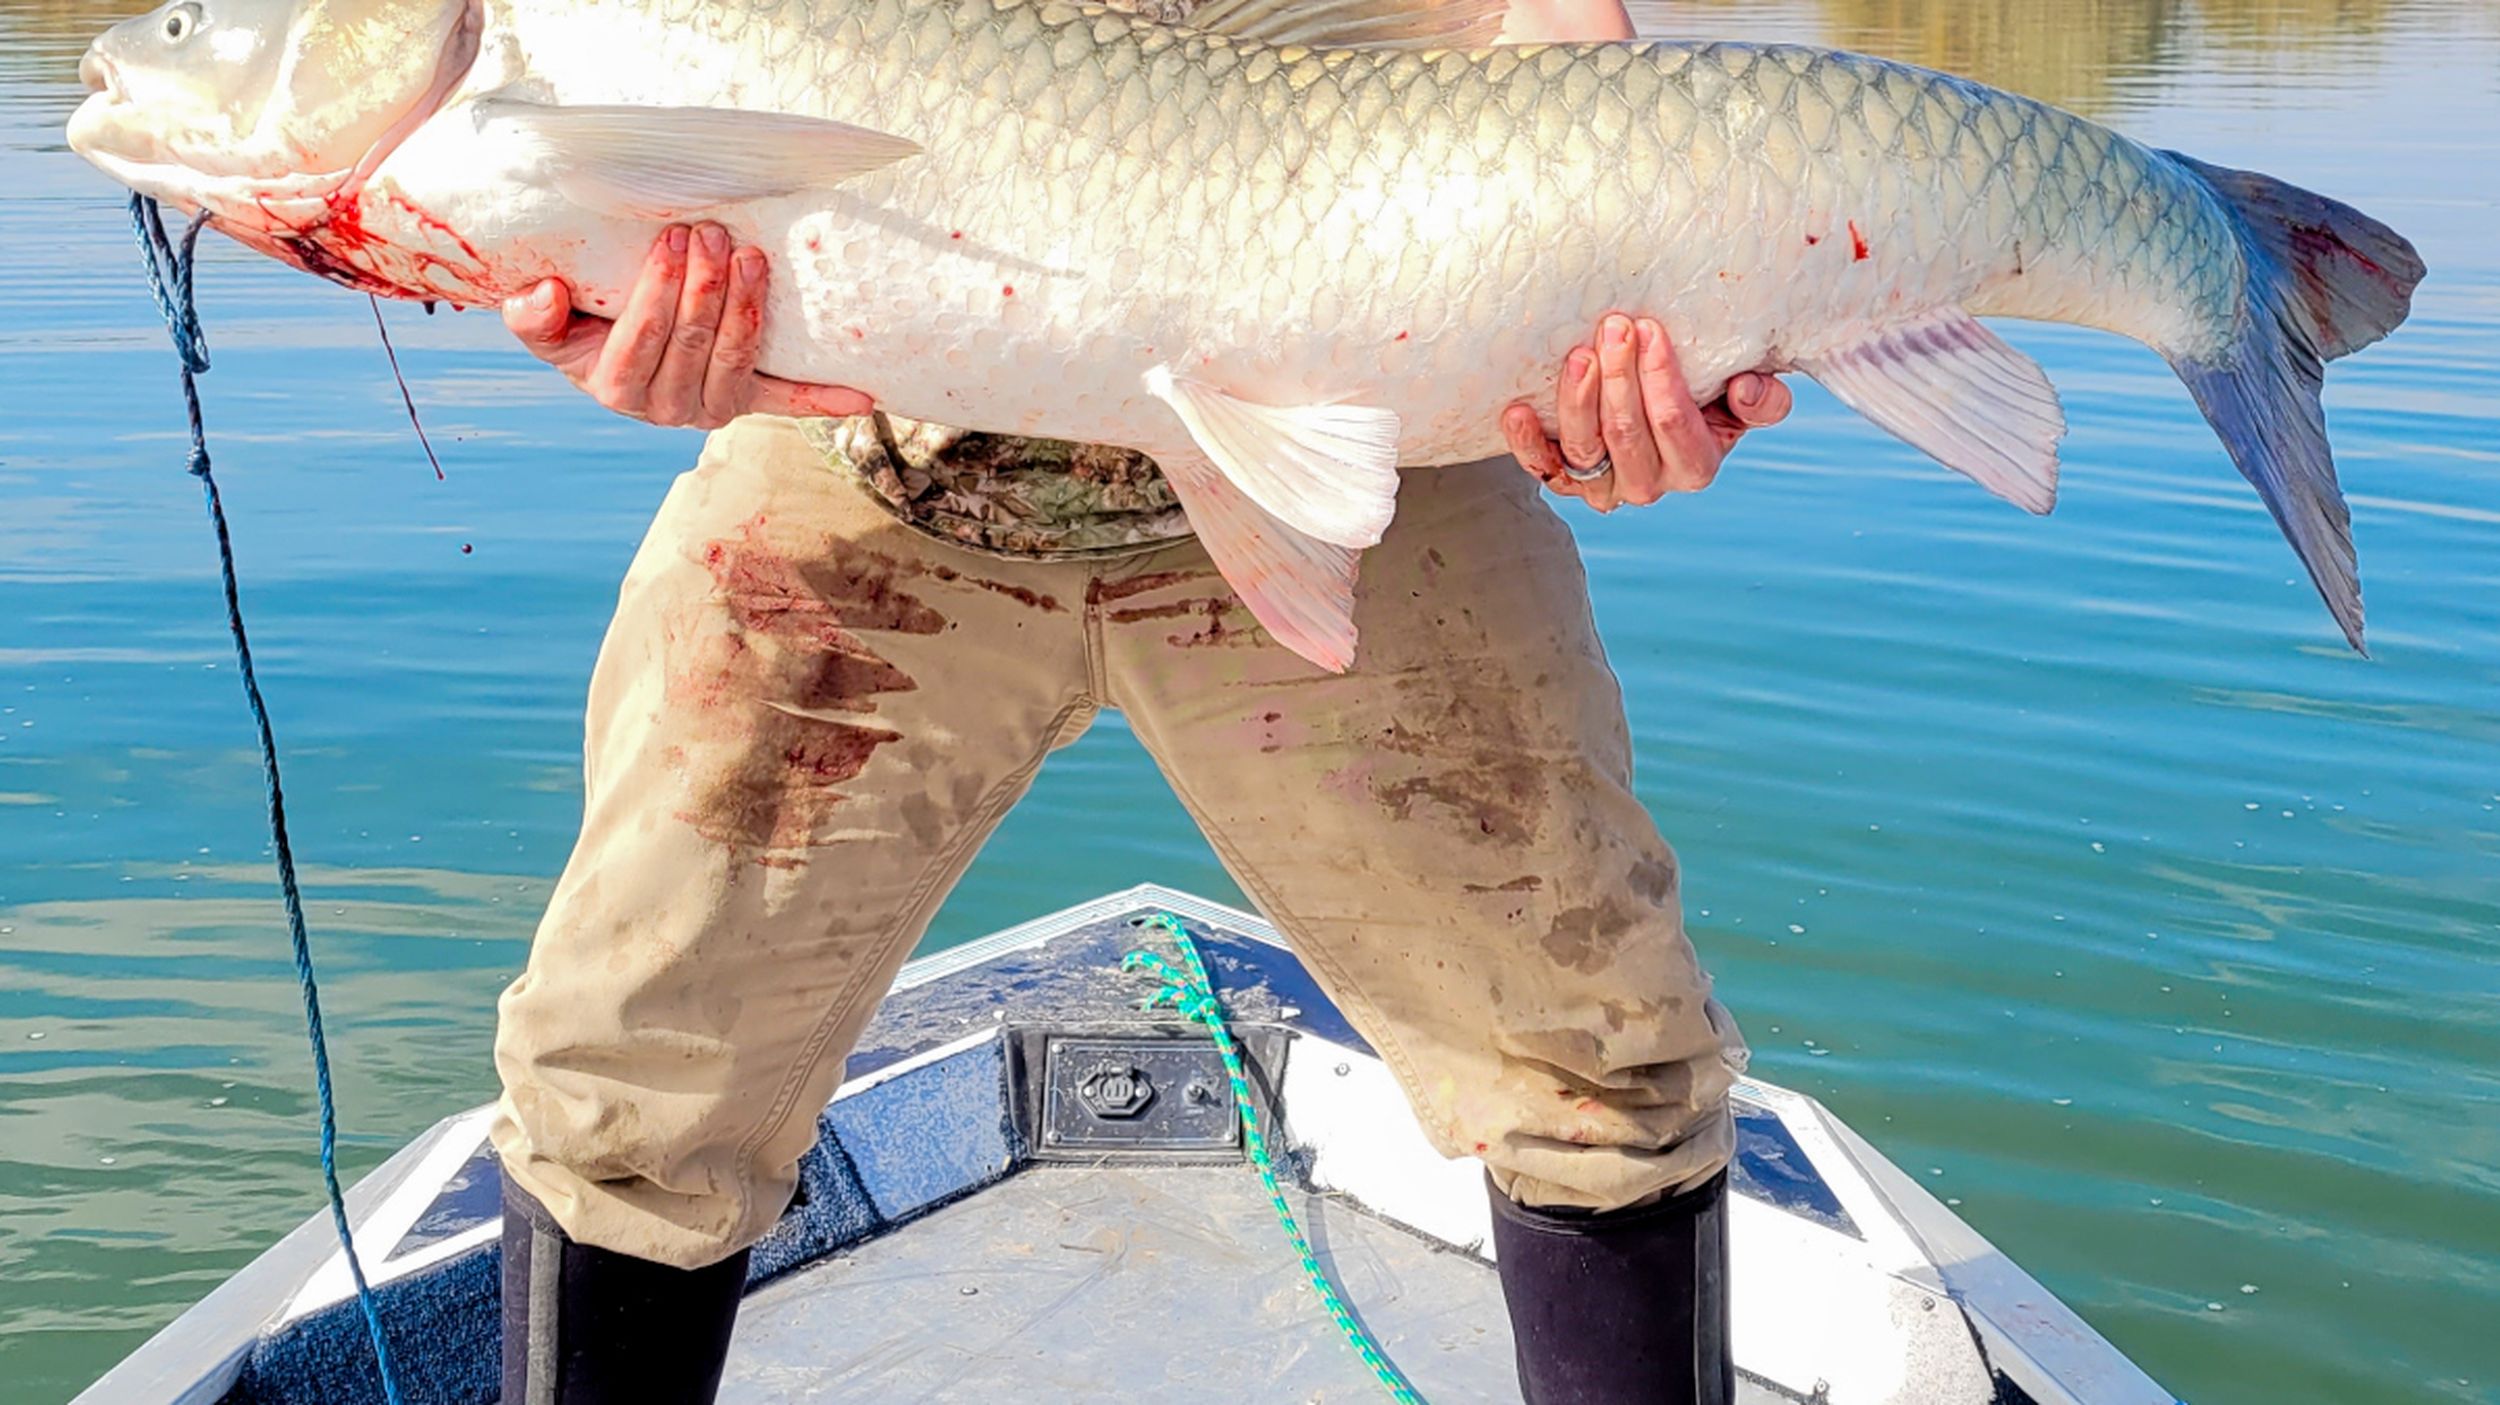 Boise-area angler smashes Idaho fishing record for grass carp with